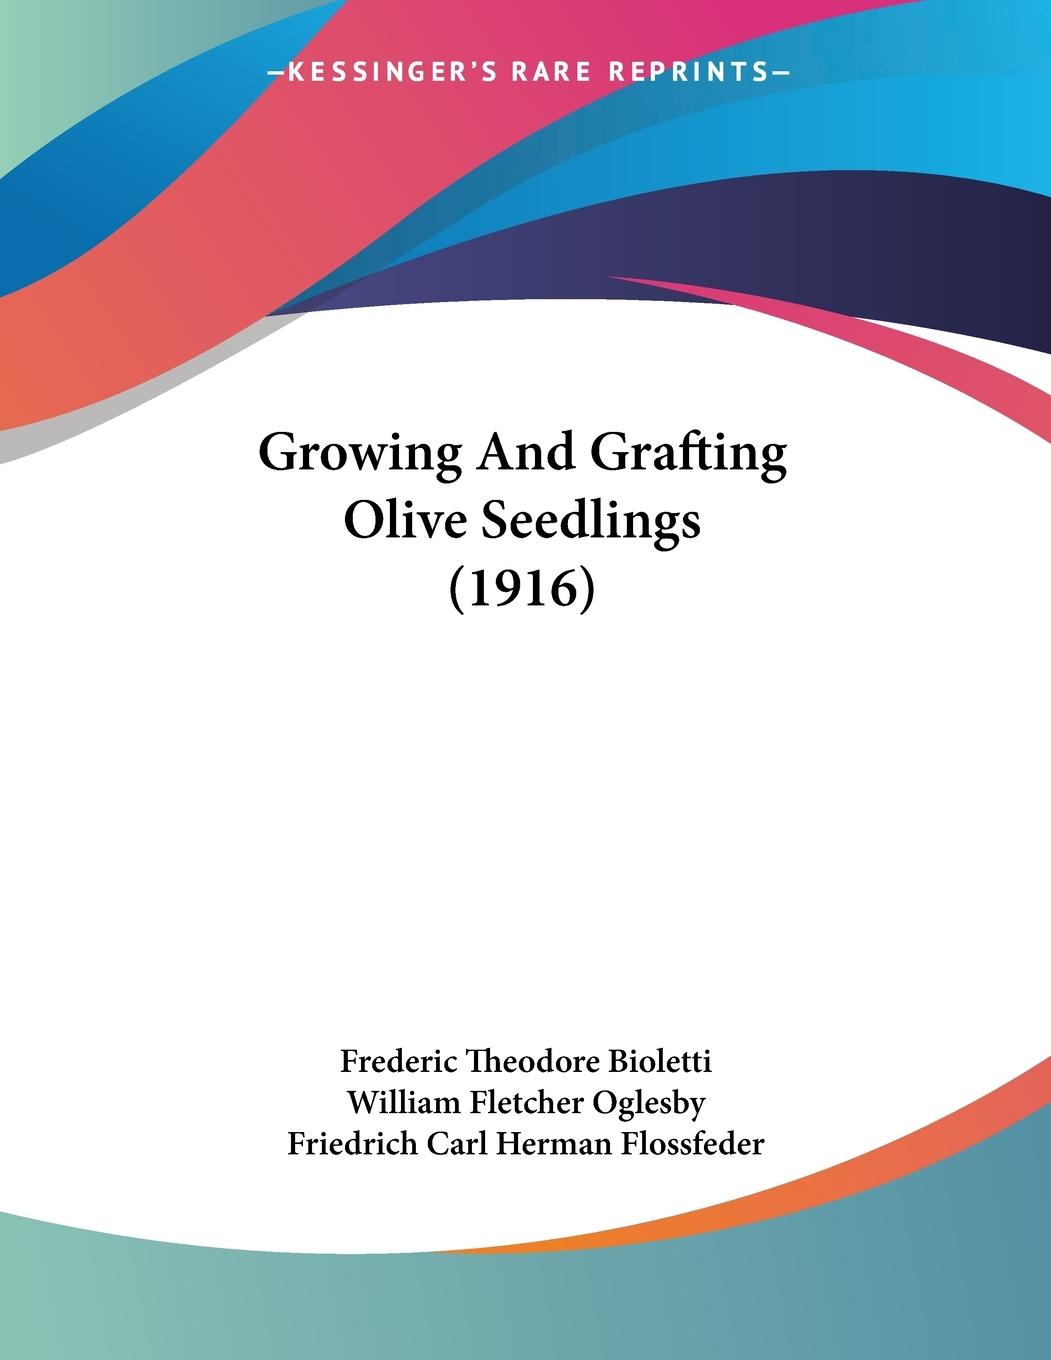 Growing And Grafting Olive Seedlings (1916) - Bioletti, Frederic Theodore Oglesby, William Fletcher Flossfeder, Friedrich Carl Herman